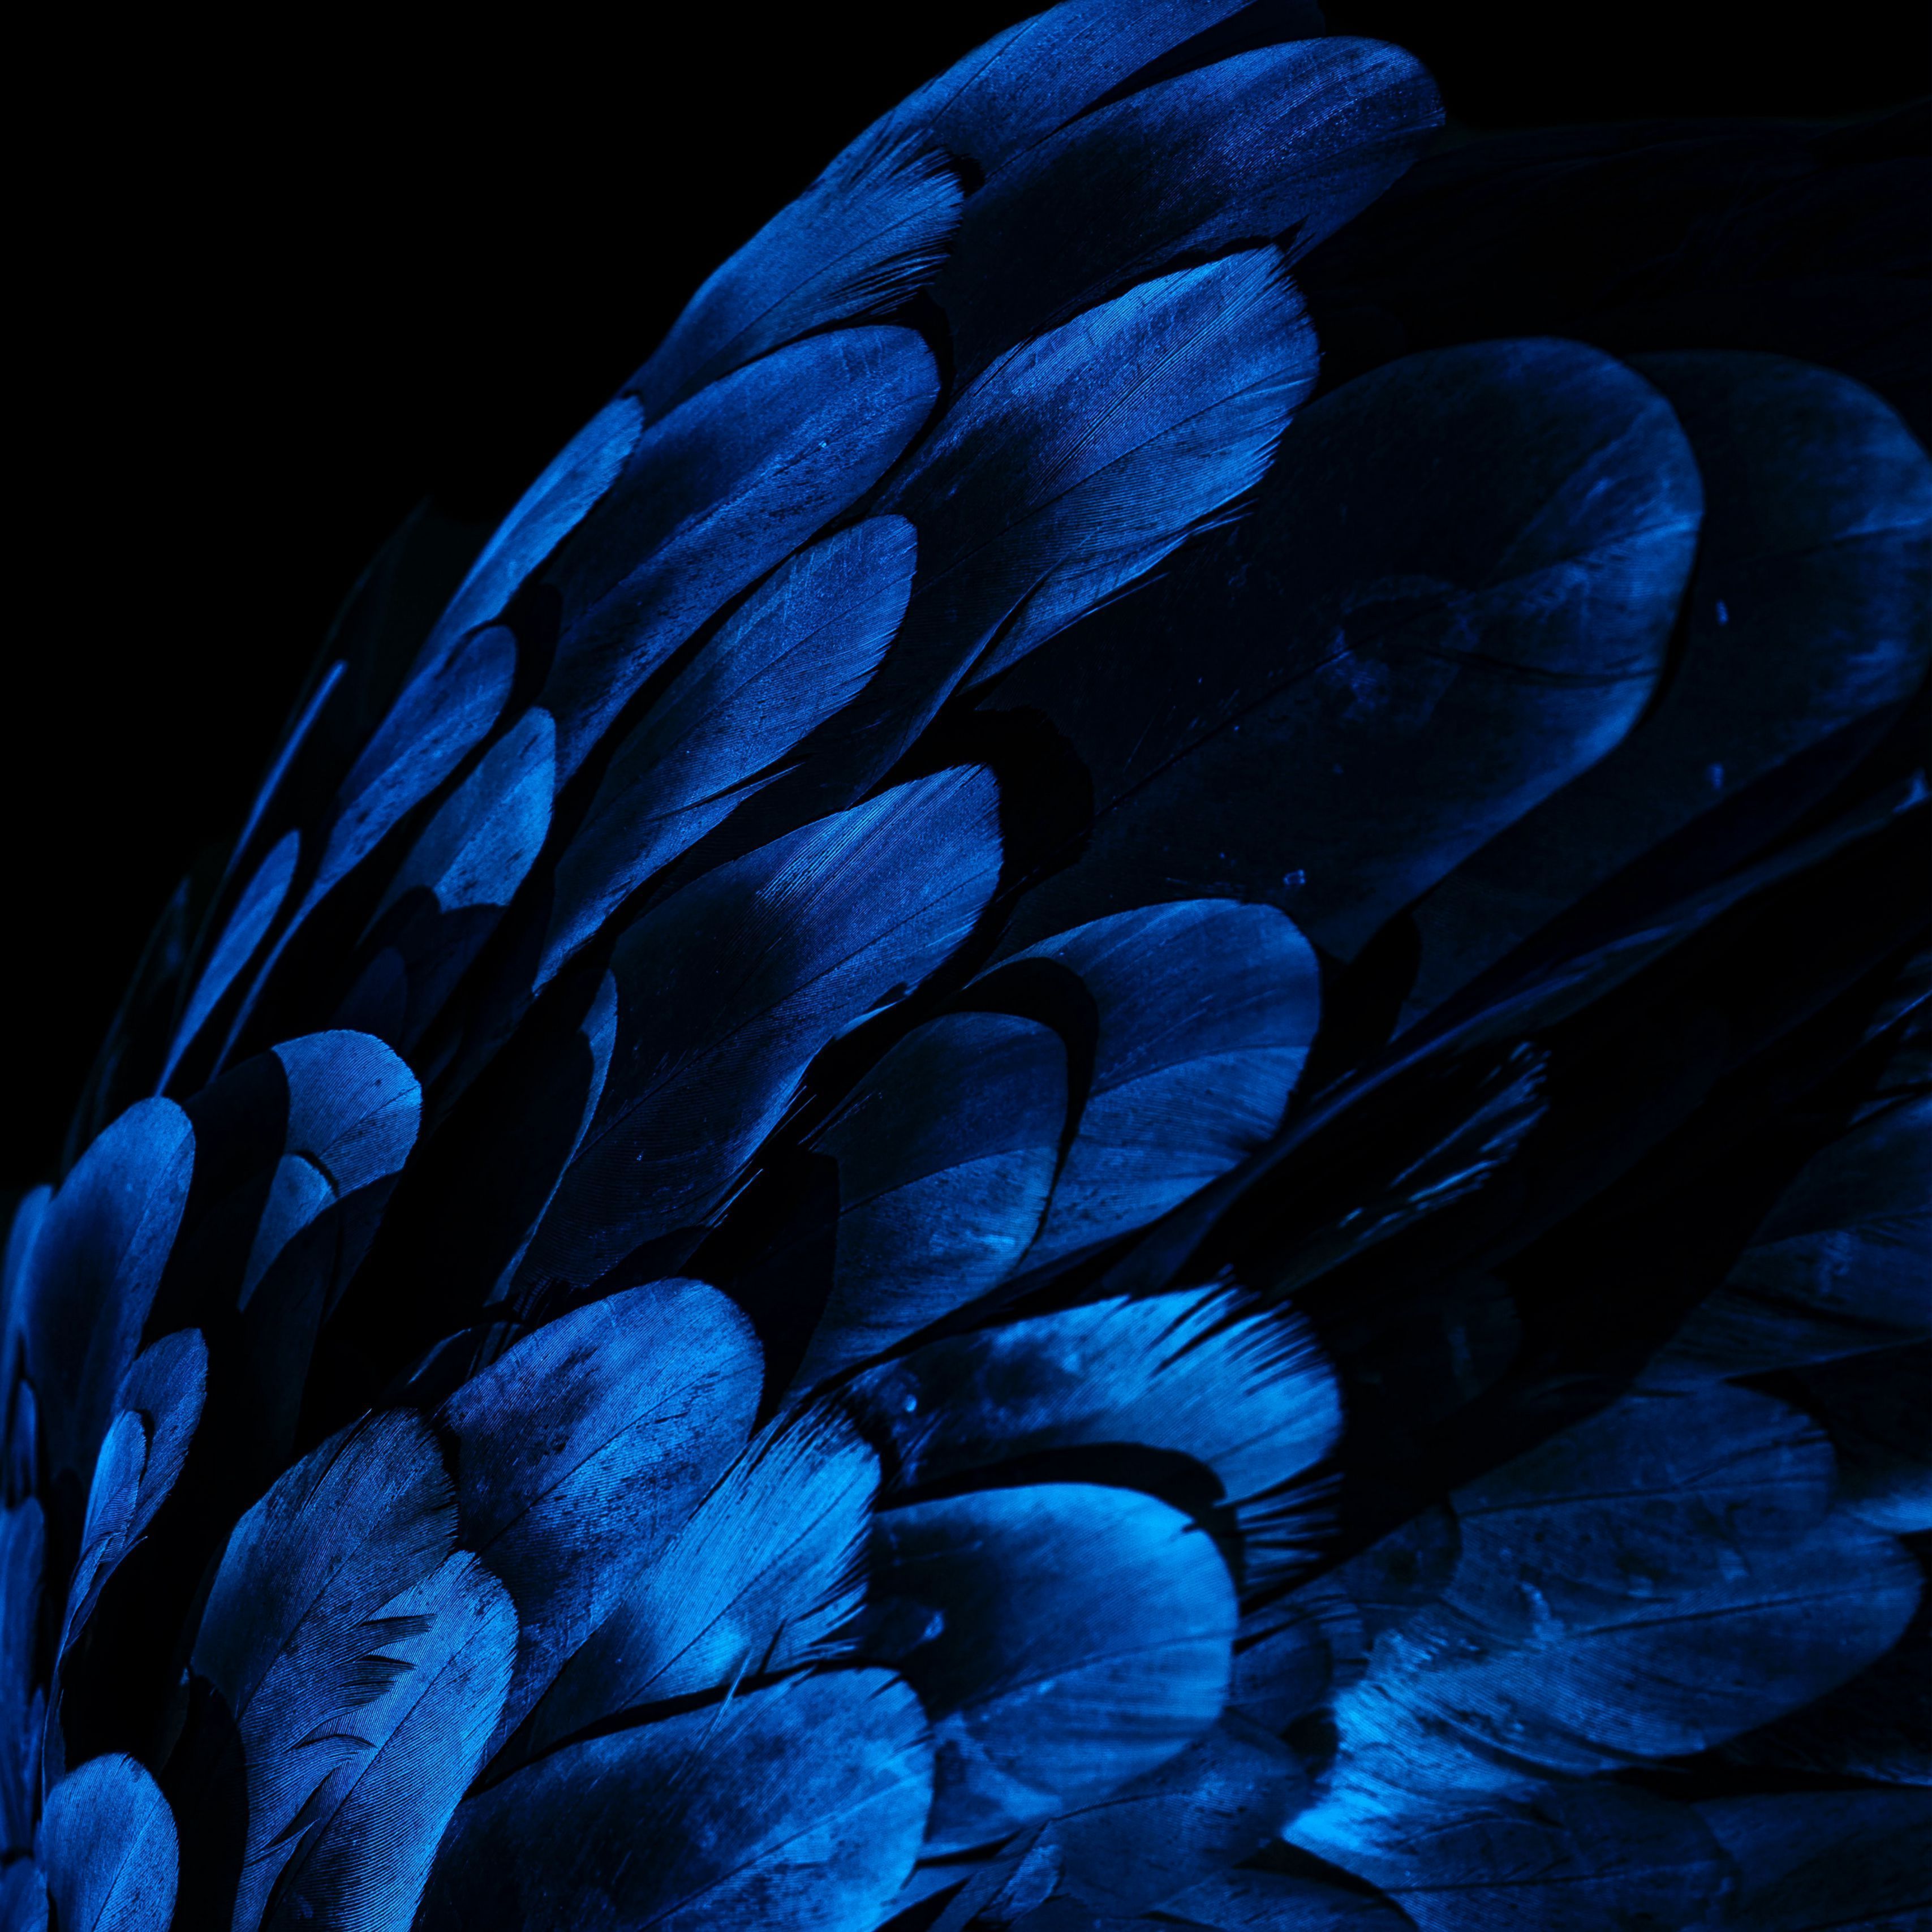 Download wallpaper 3415x3415 feathers, wing, blue, dark ipad pro 12.9 retina for parallax HD background